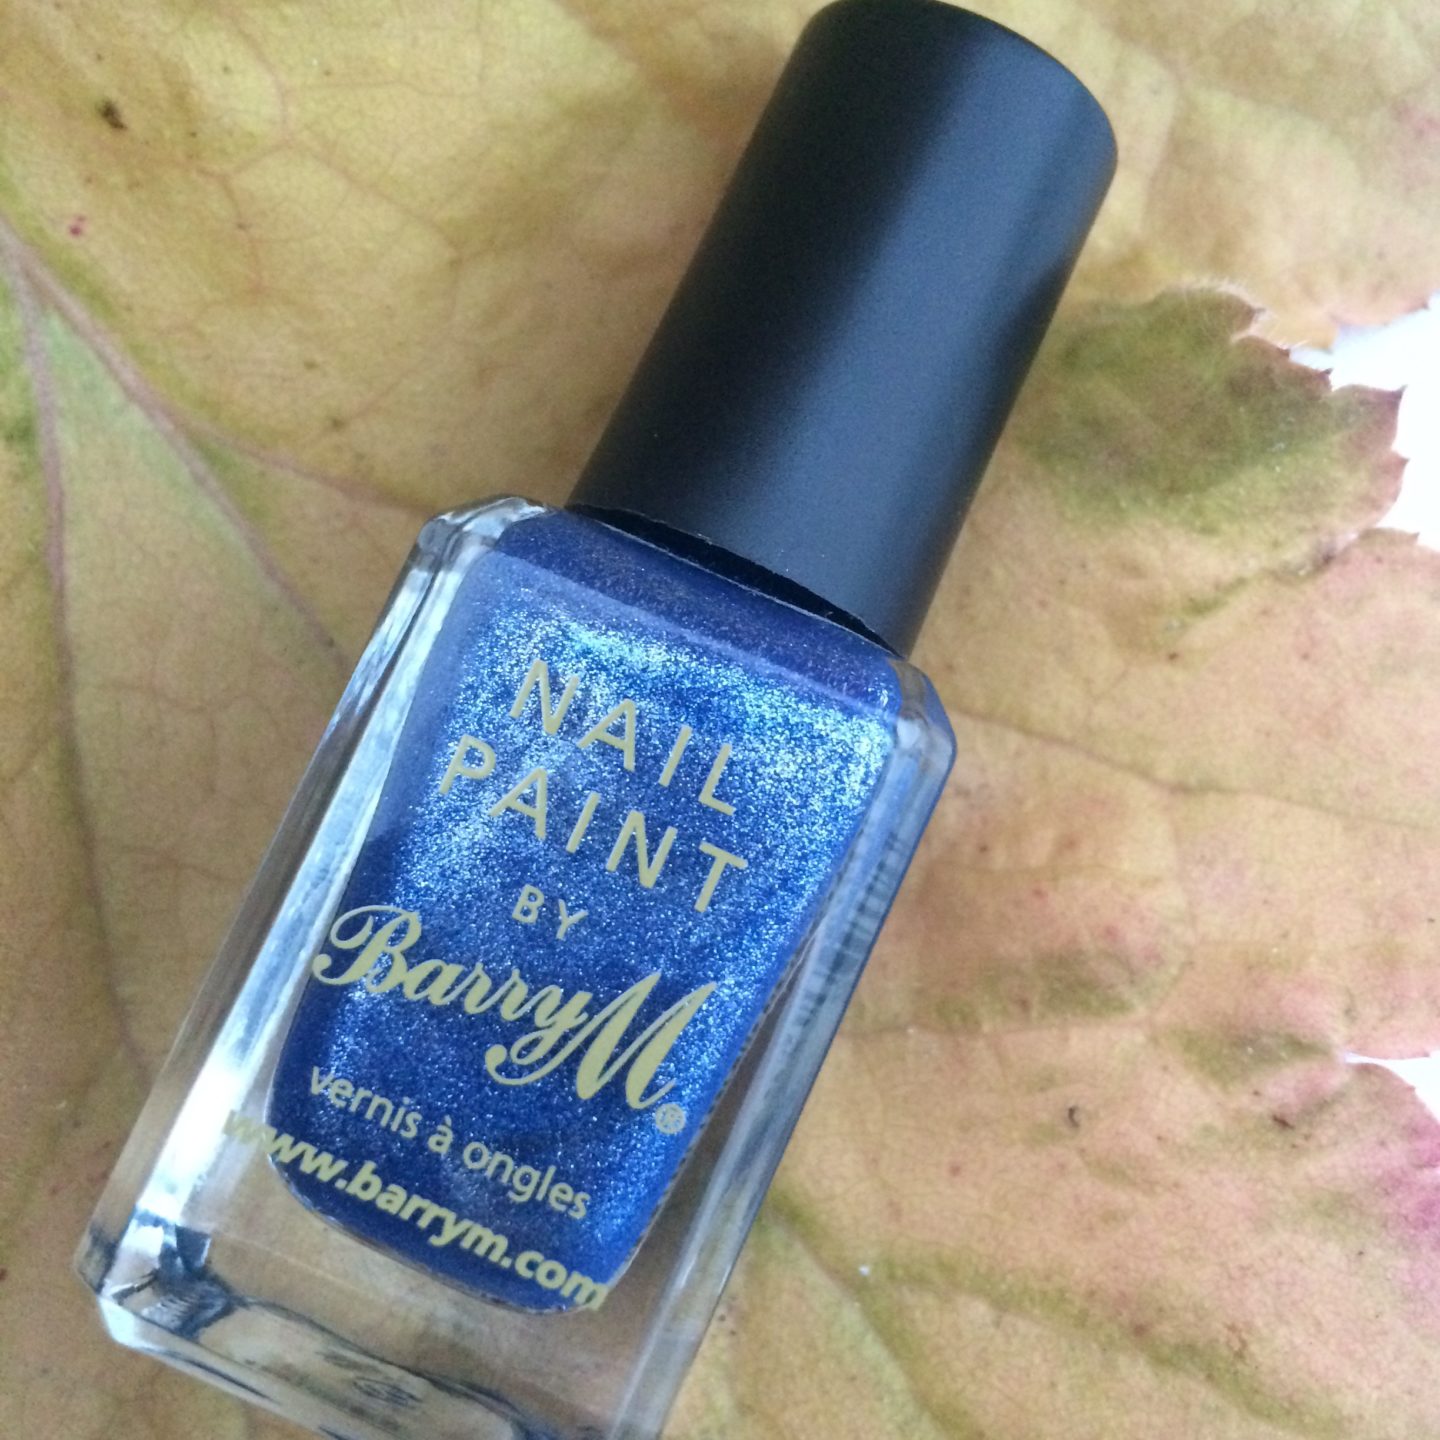 Barry M Denim swatch and review